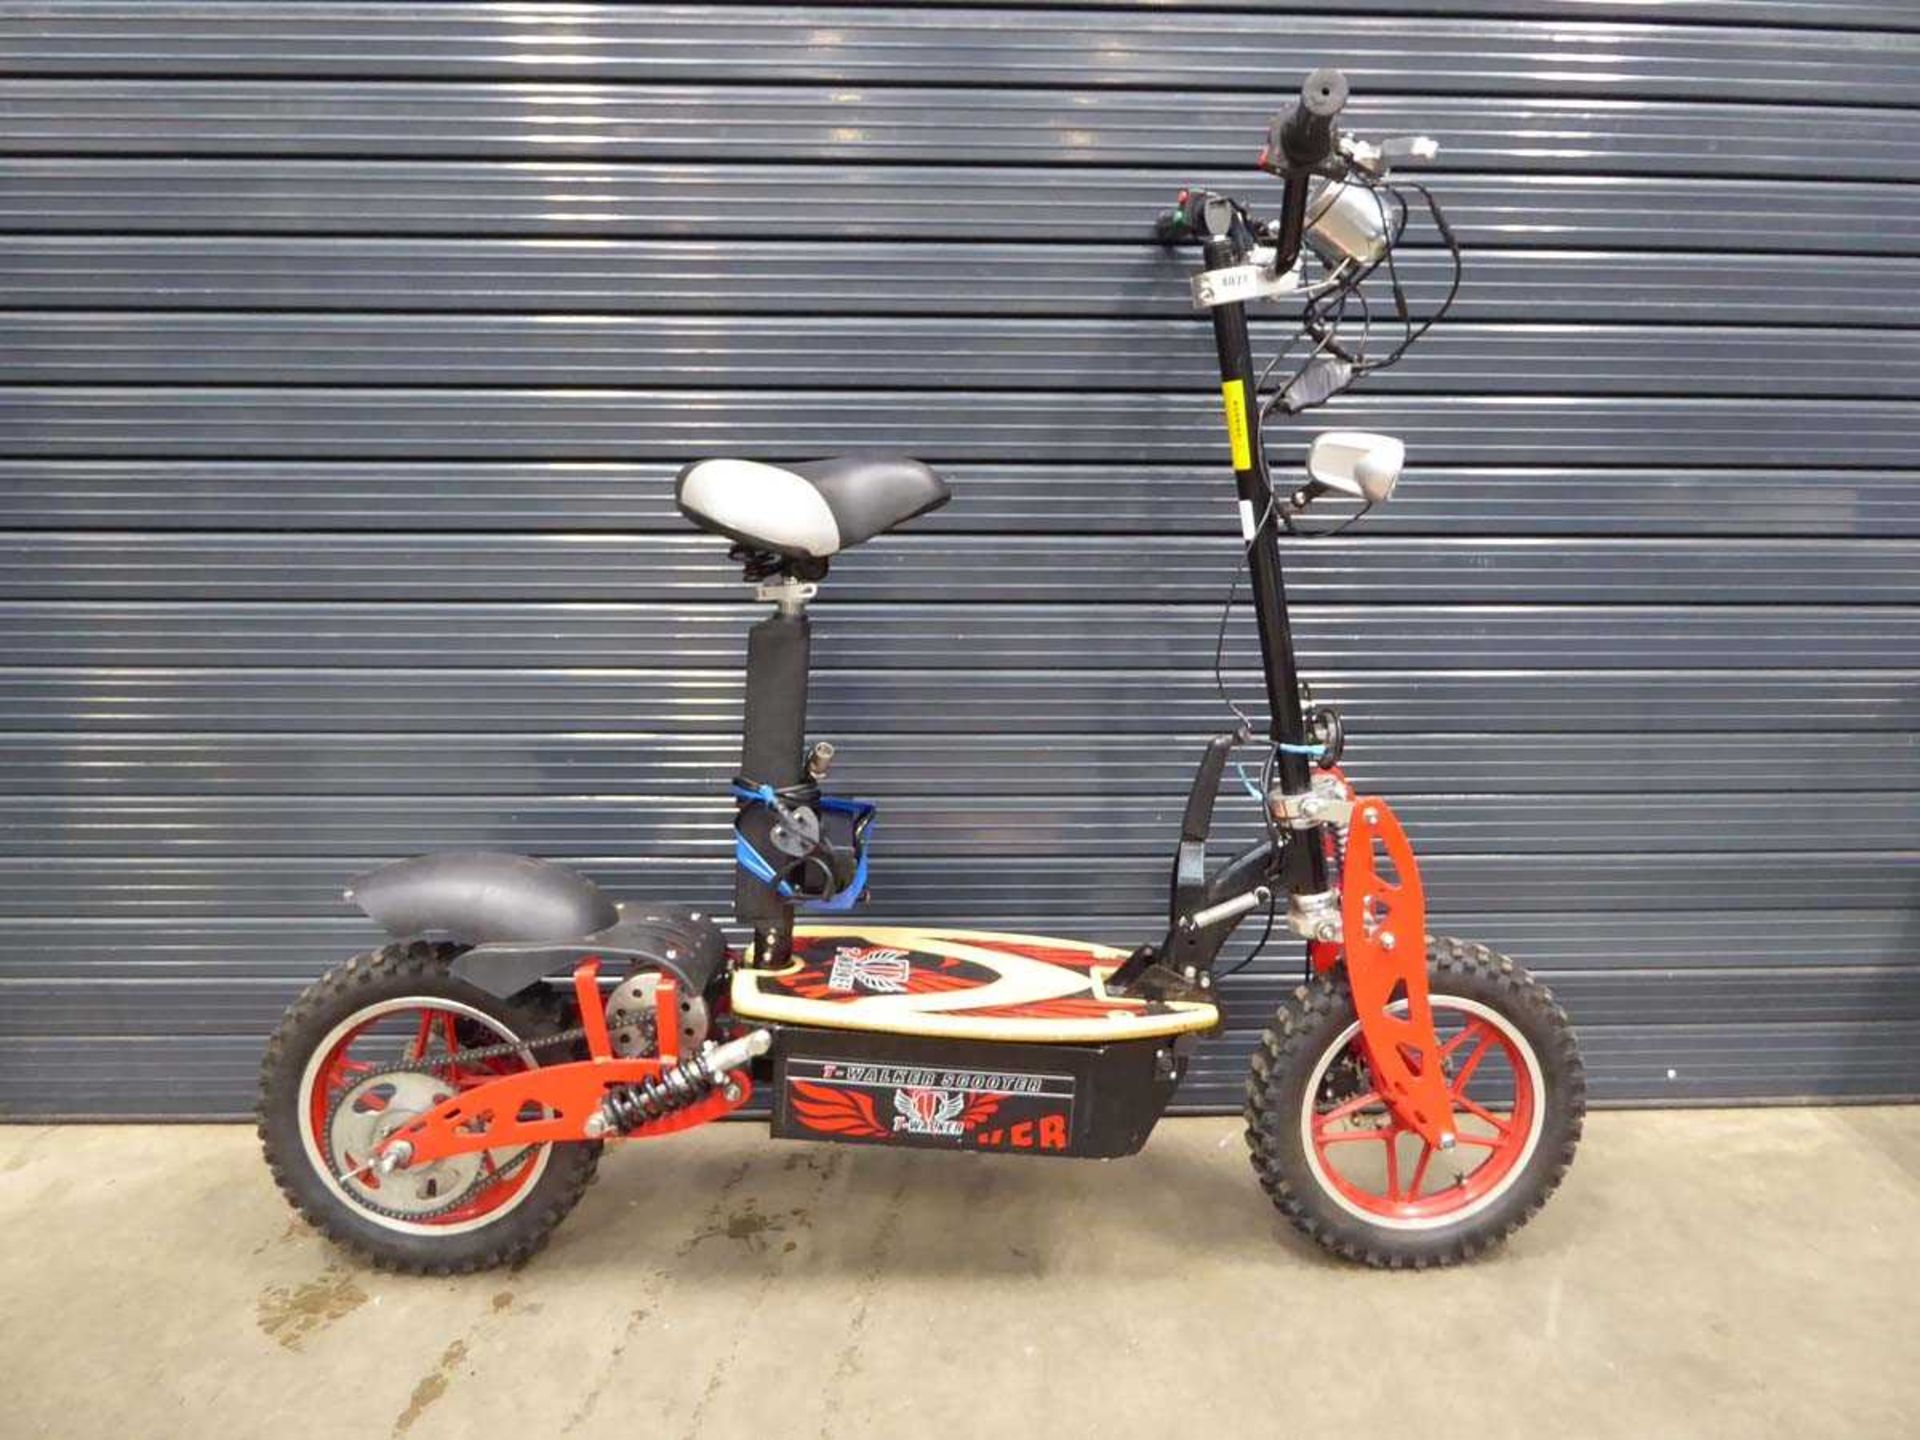 T-Walker large wheel electric scooter with seat